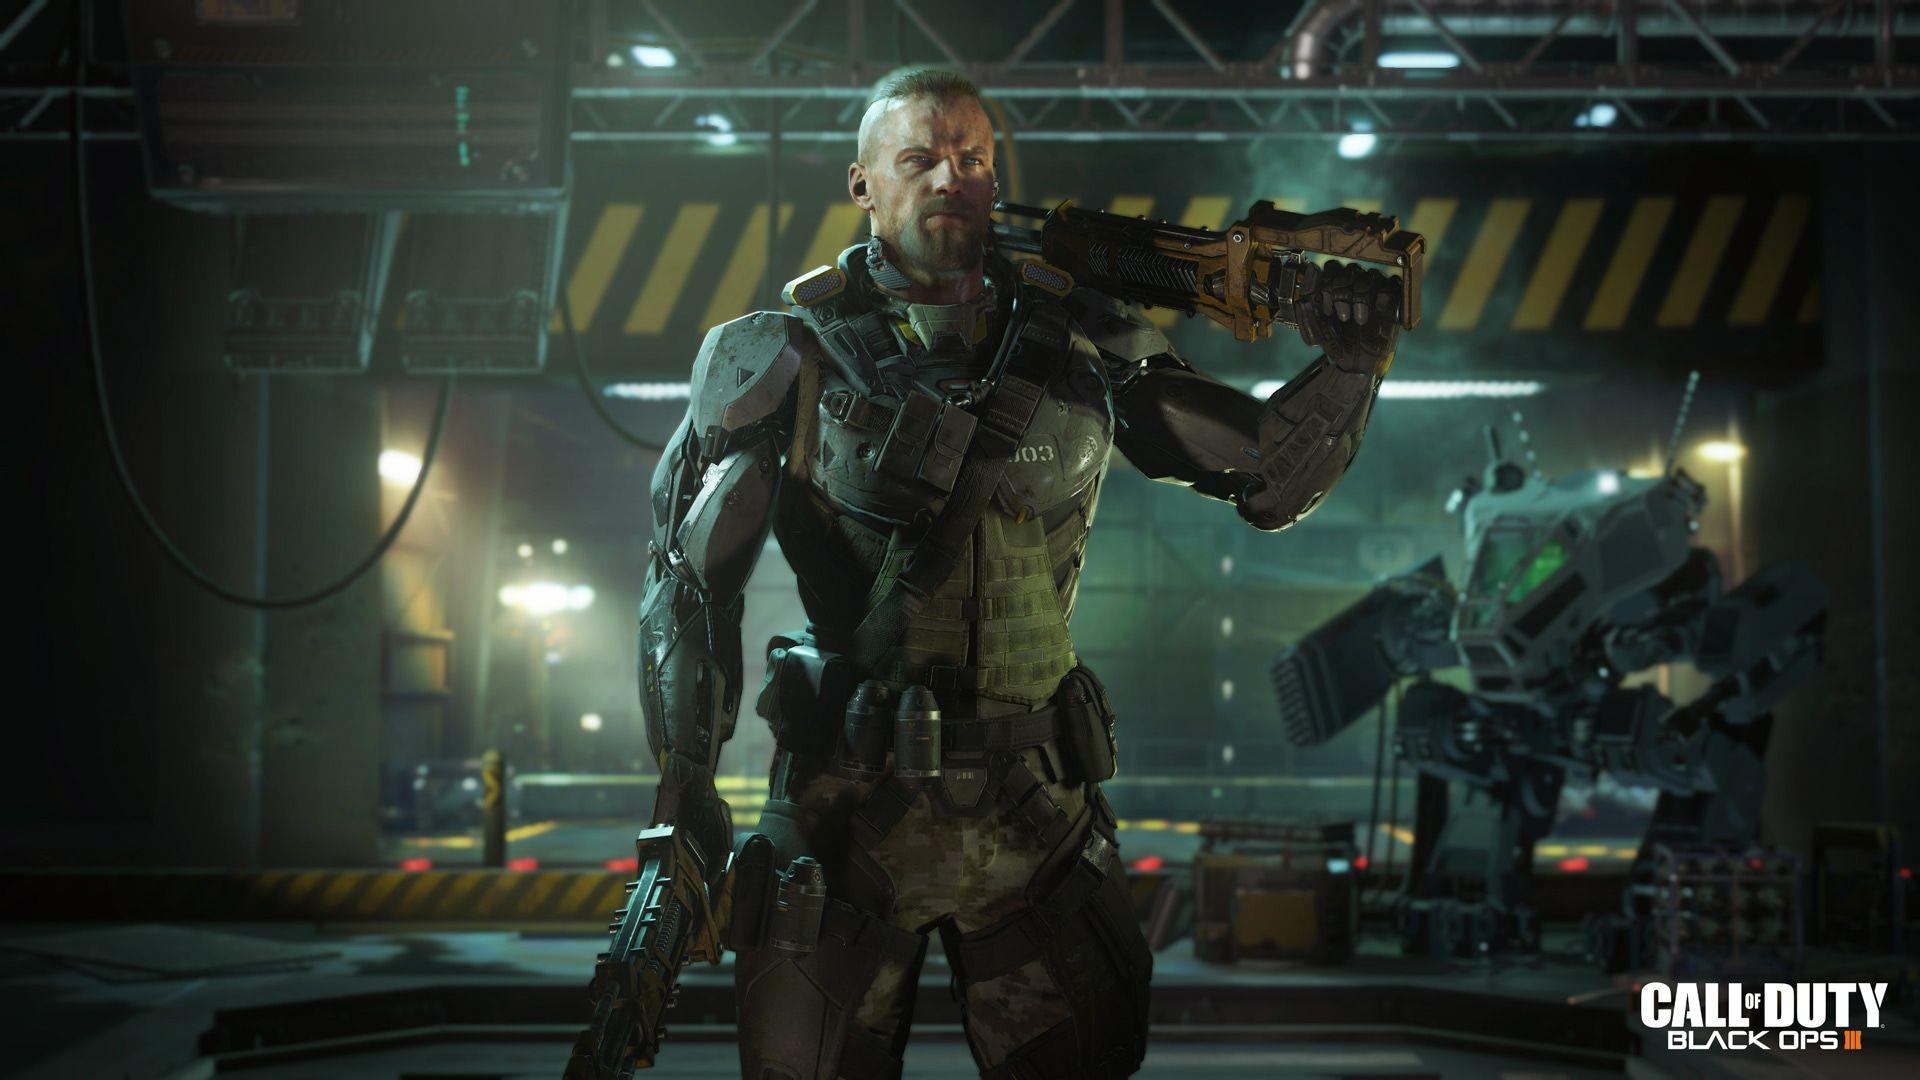 Review: Call of Duty Black Ops 3